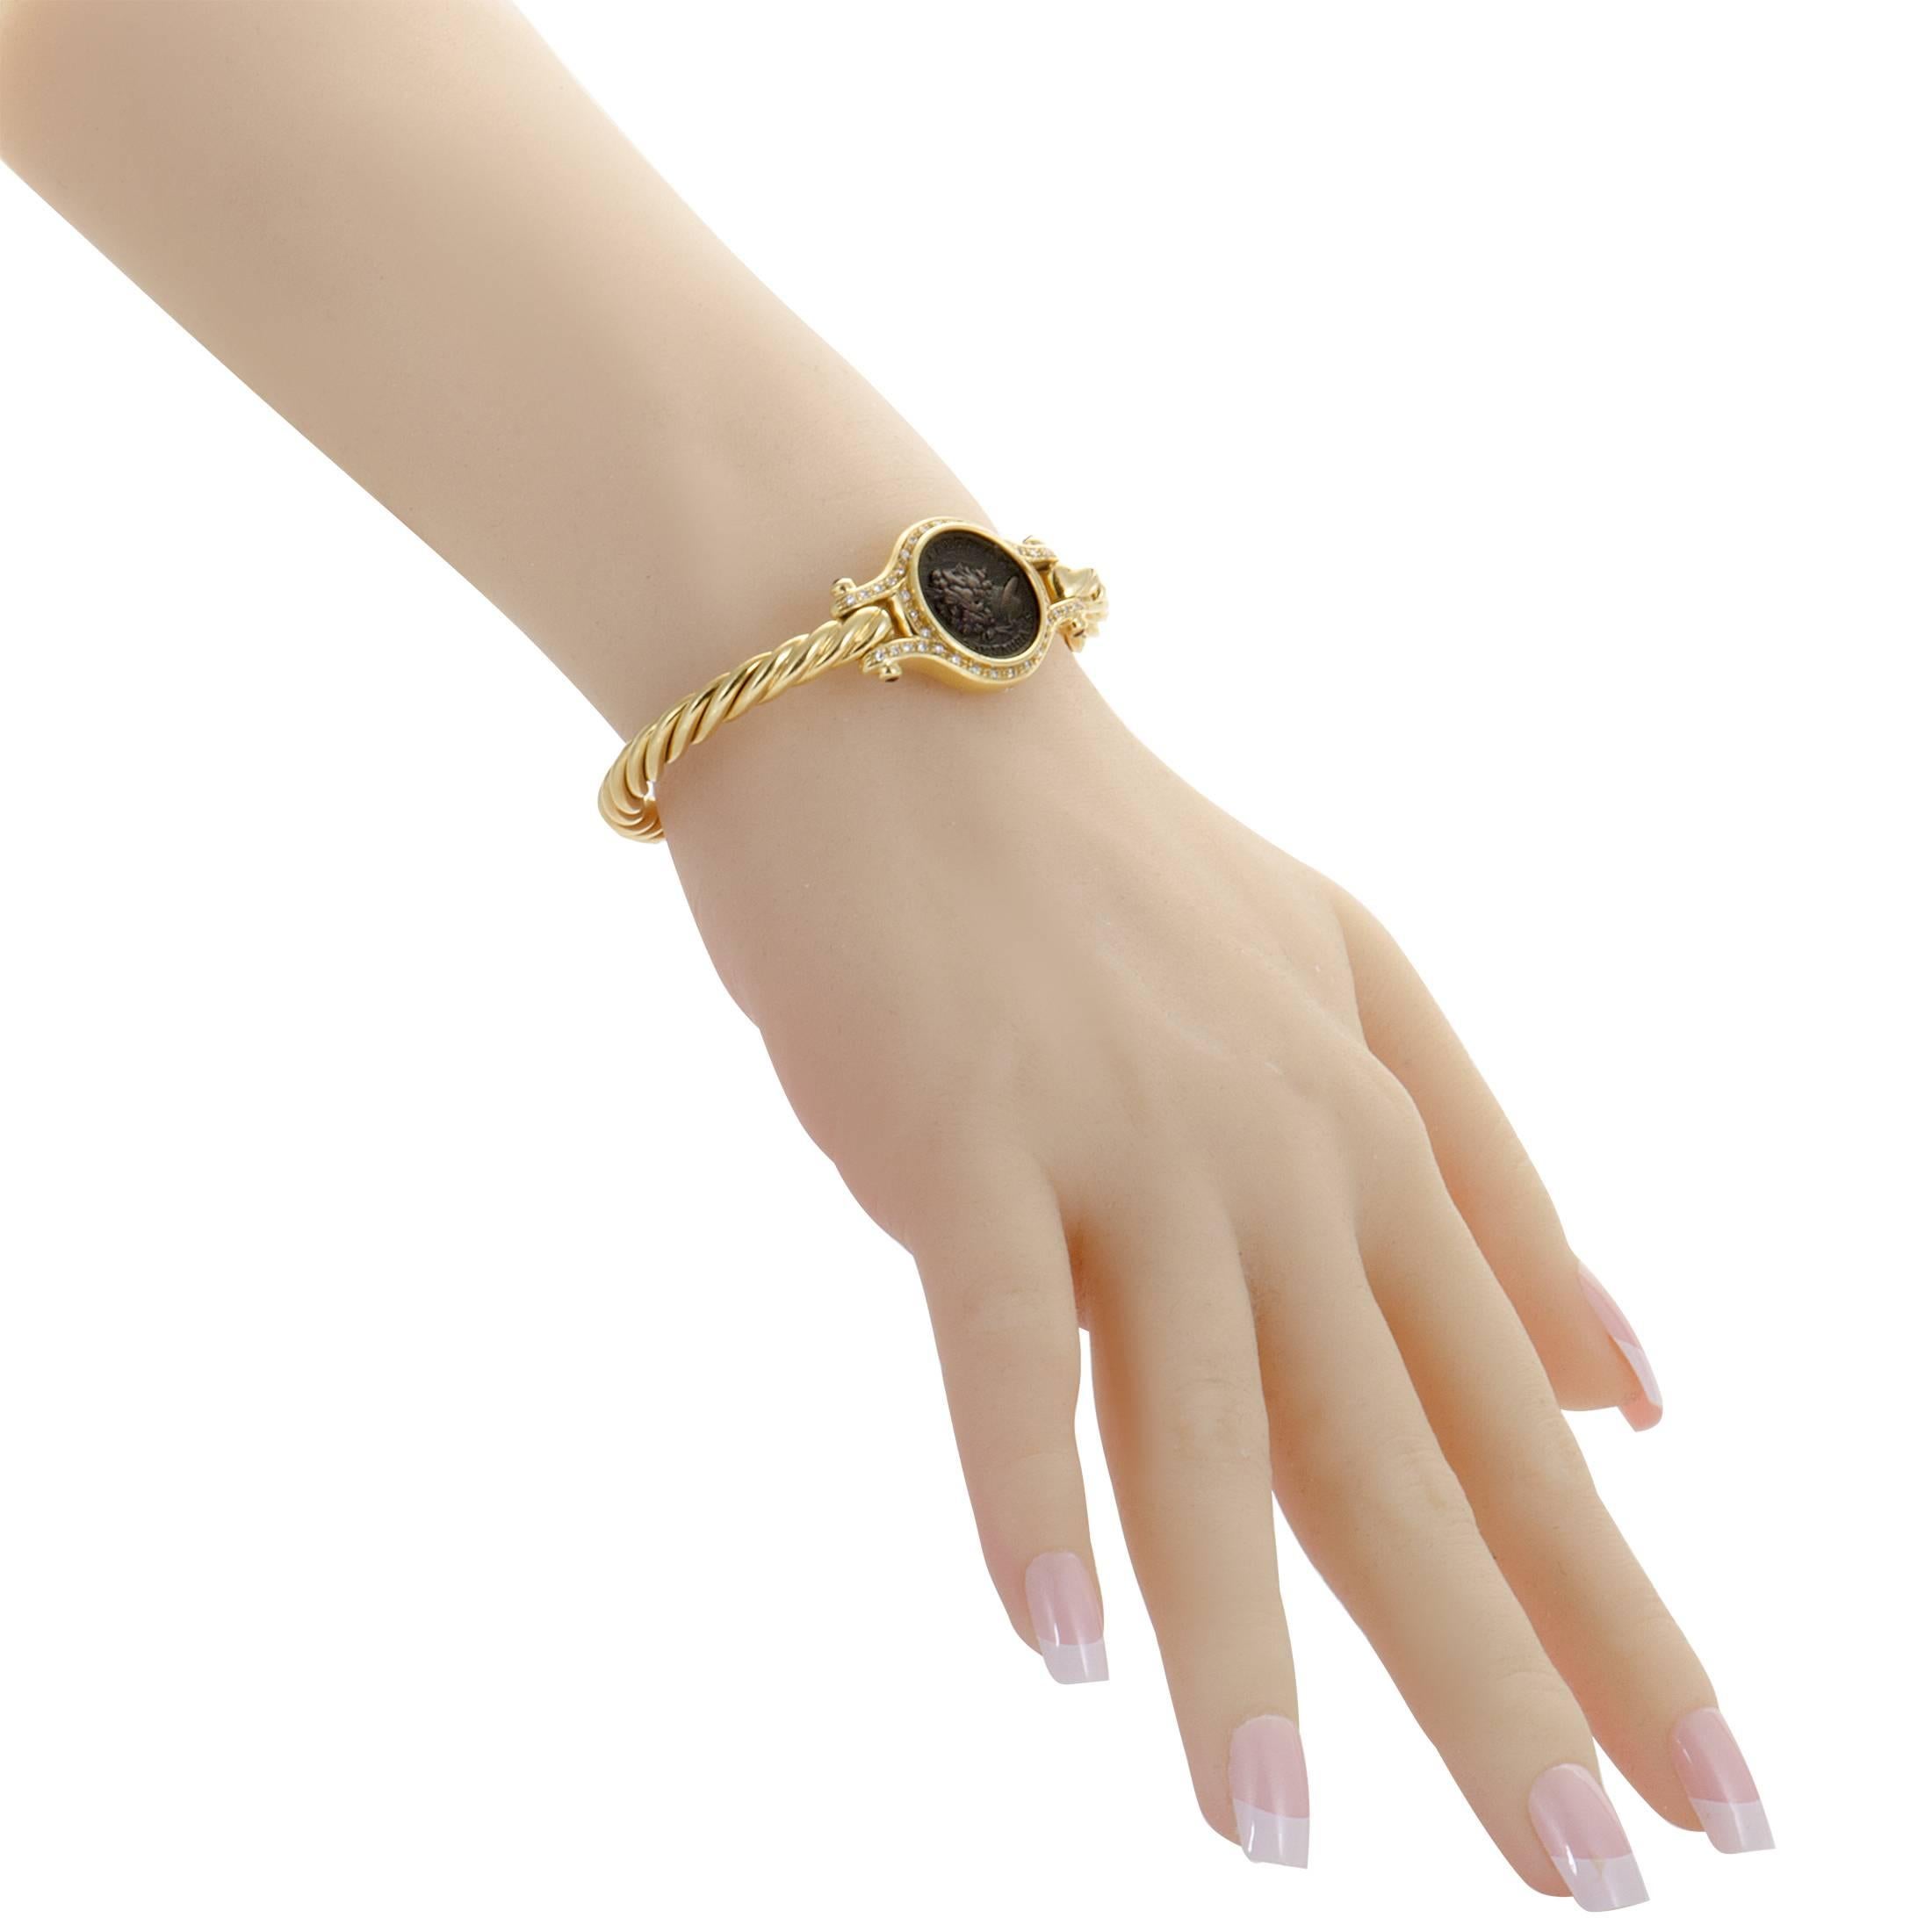 Harmoniously combining the classic elegant allure of 18K yellow gold with endearing antique appeal of the ancient coin, this stunning bracelet offers tasteful offbeat appearance. The bracelet is embellished with rubies and 0.40 carats of